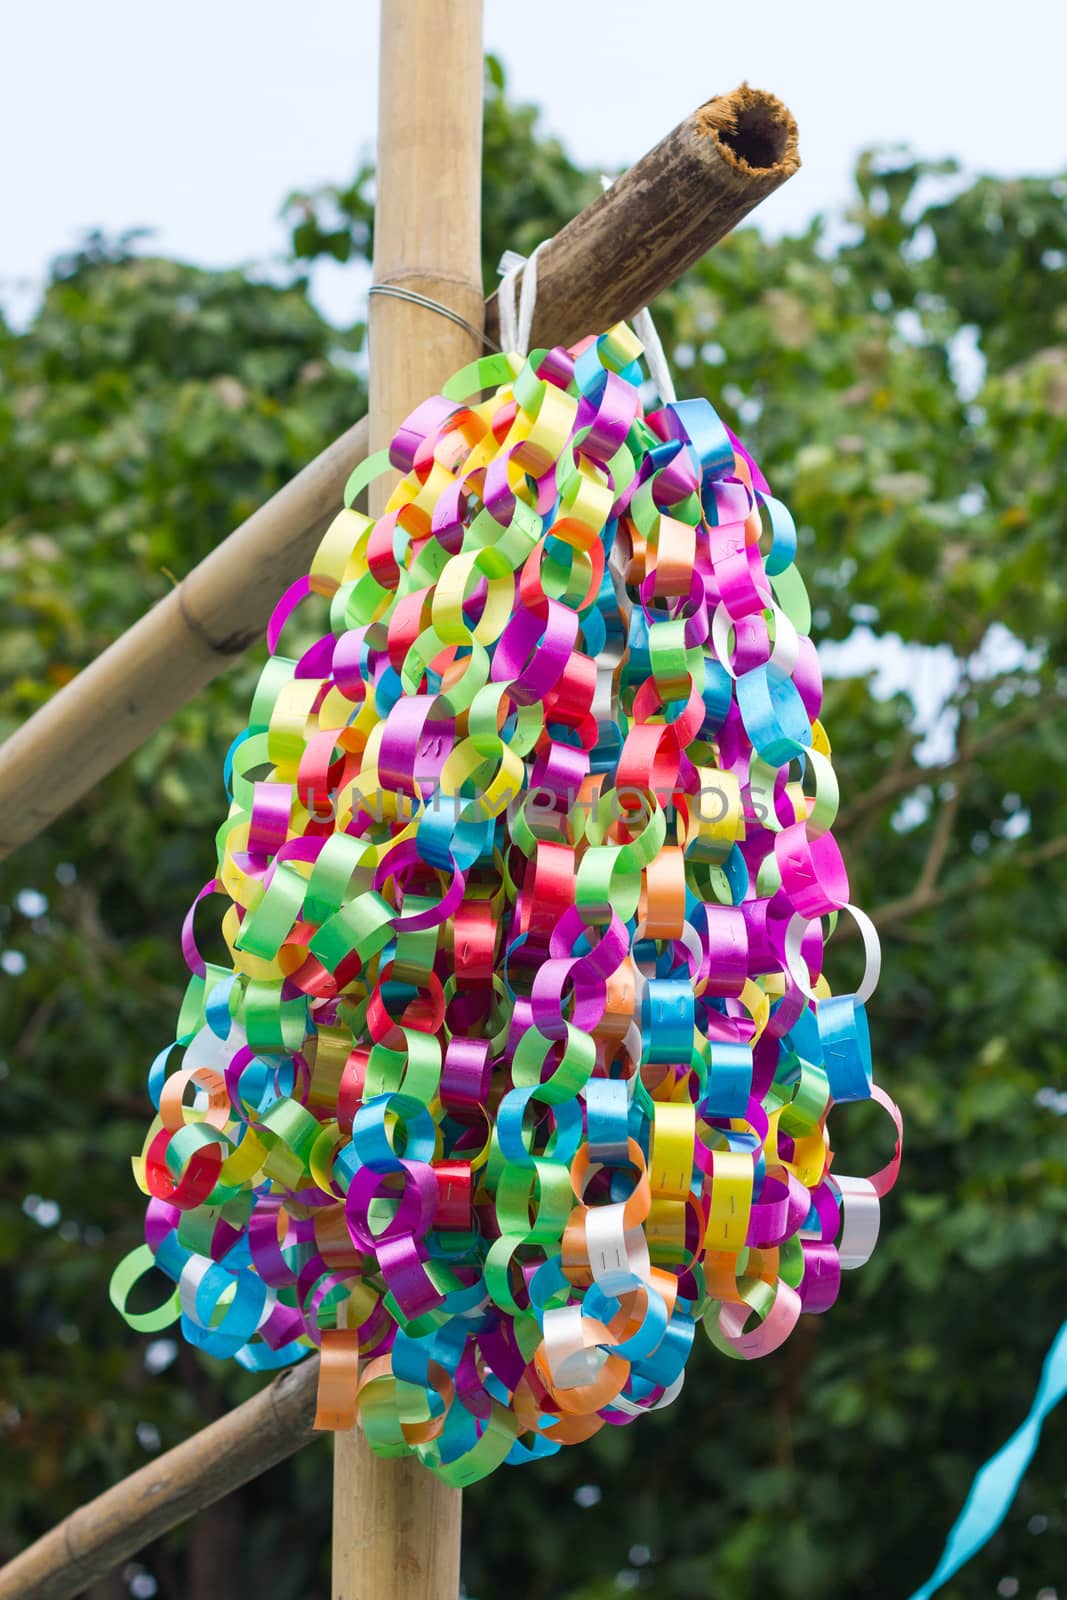 rolled colorful ribbon used for decorating place for worship in Thailand